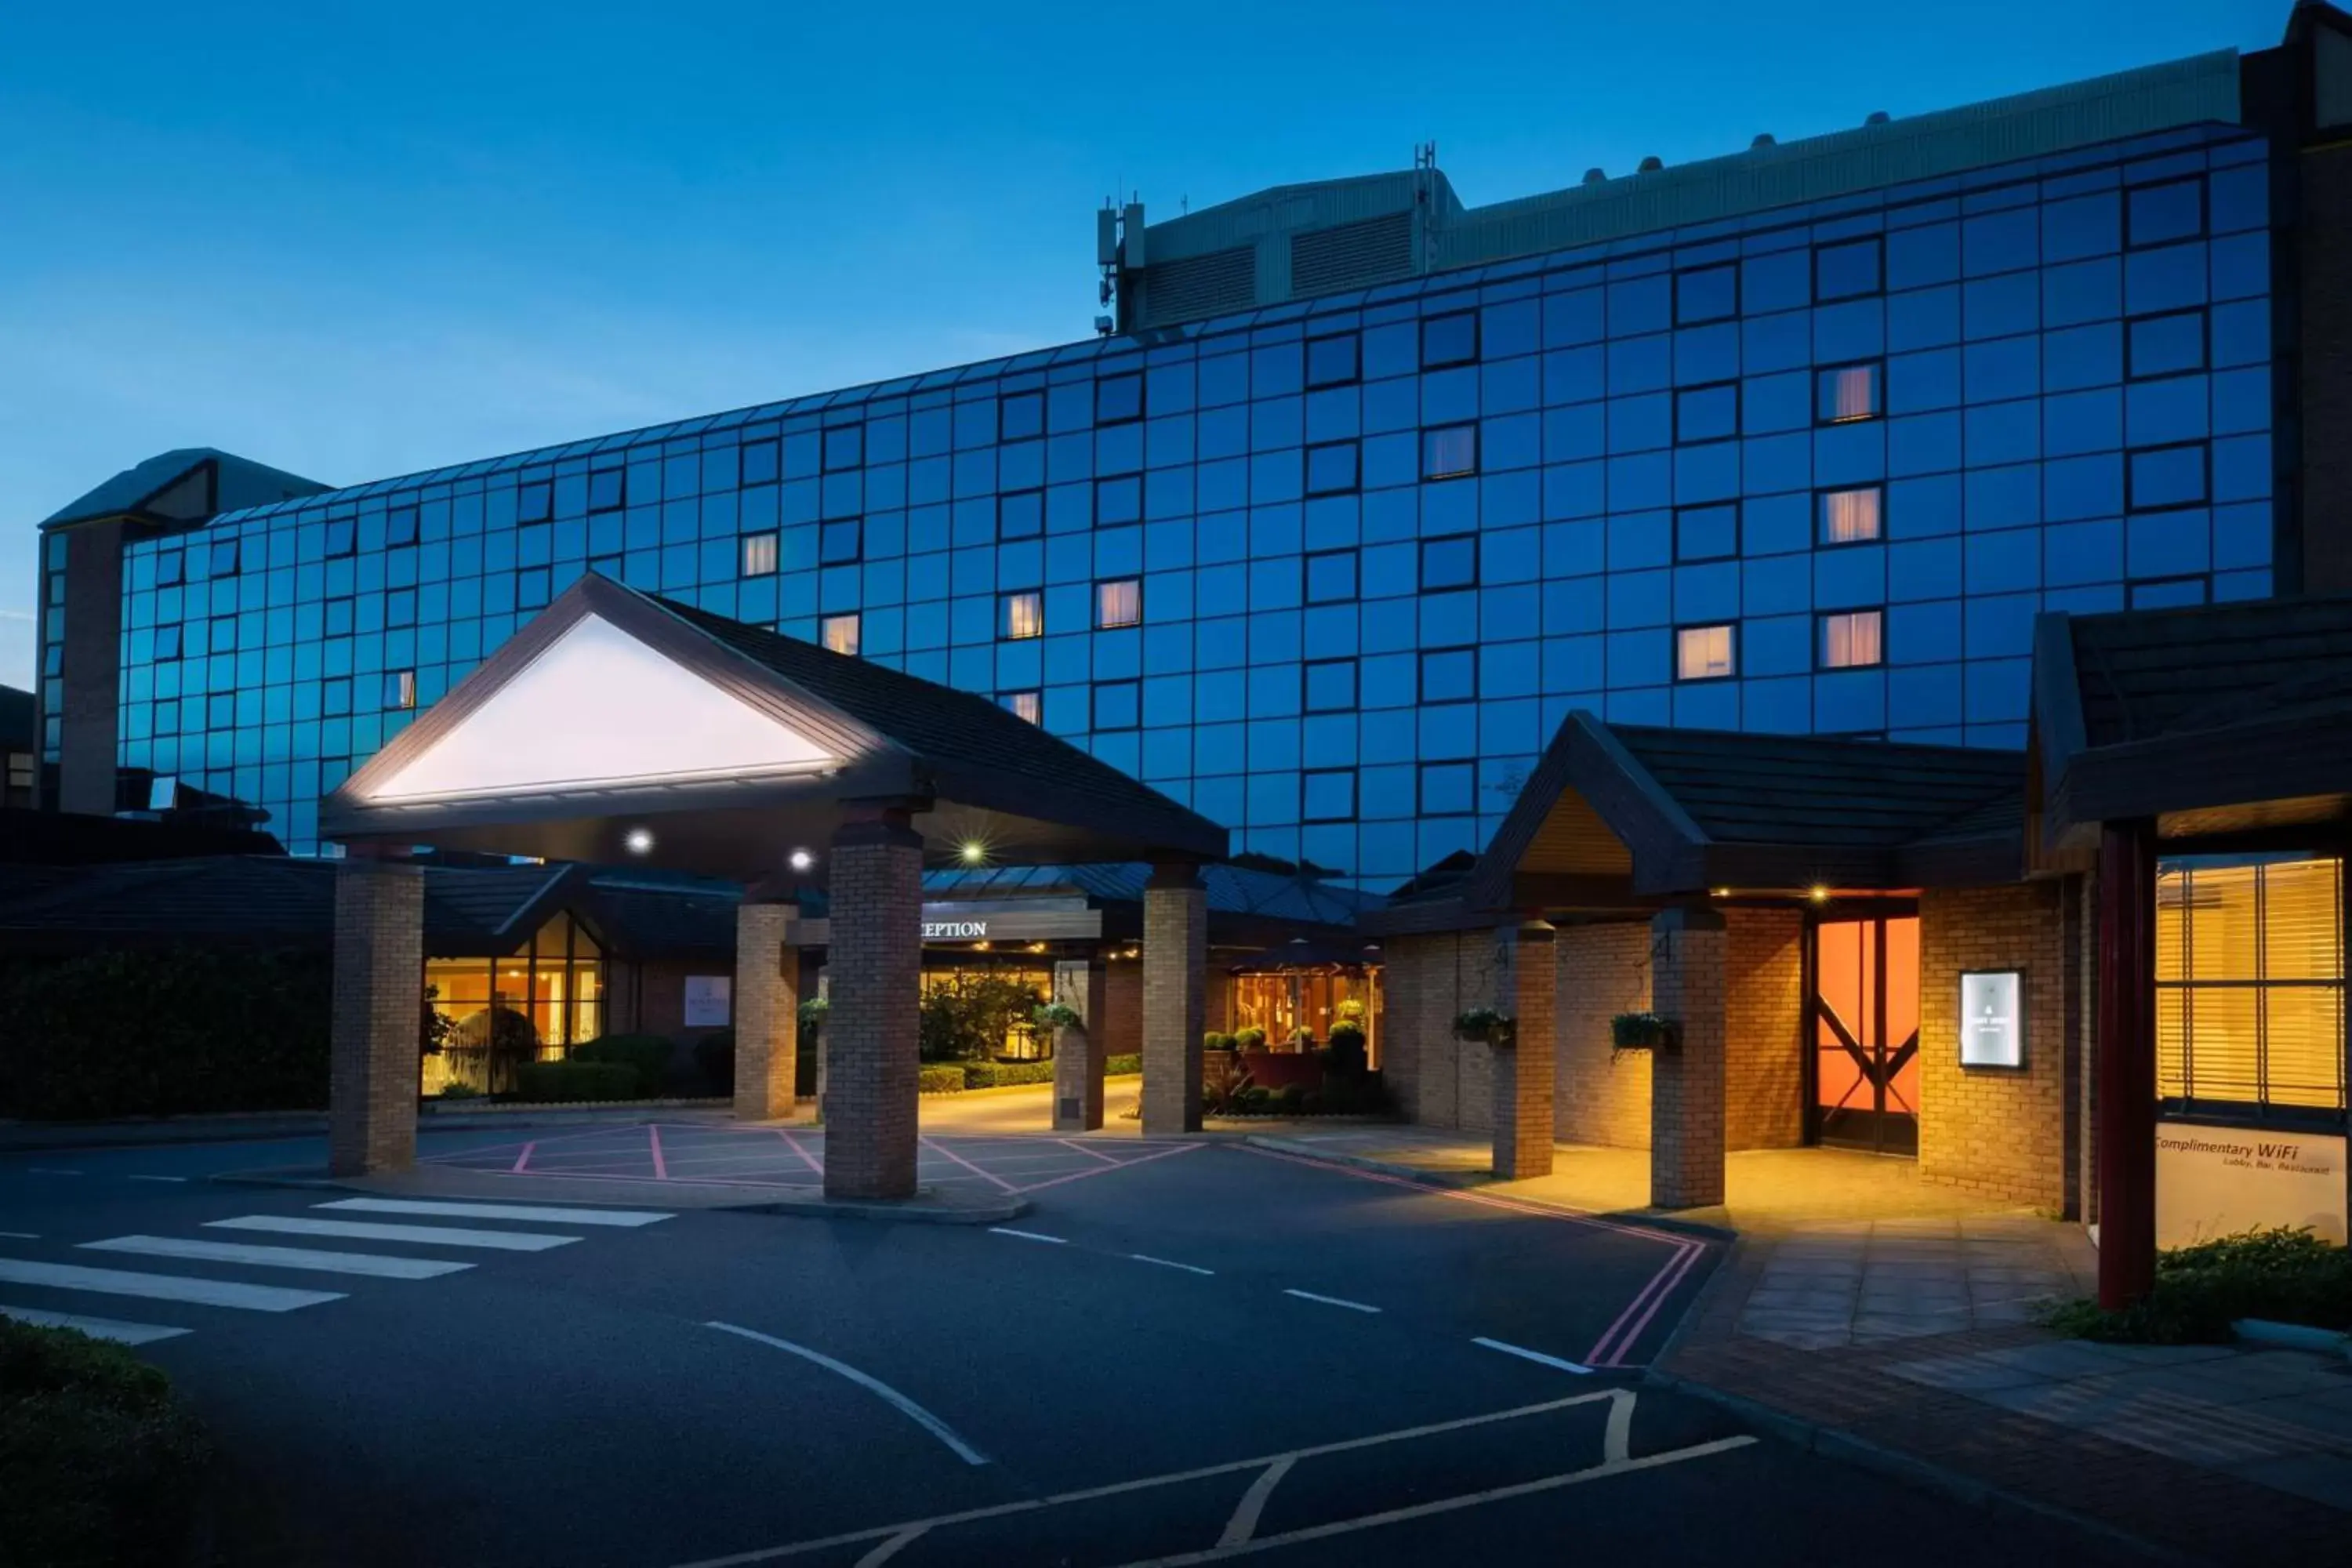 Property Building in Delta Hotels by Marriott Newcastle Gateshead